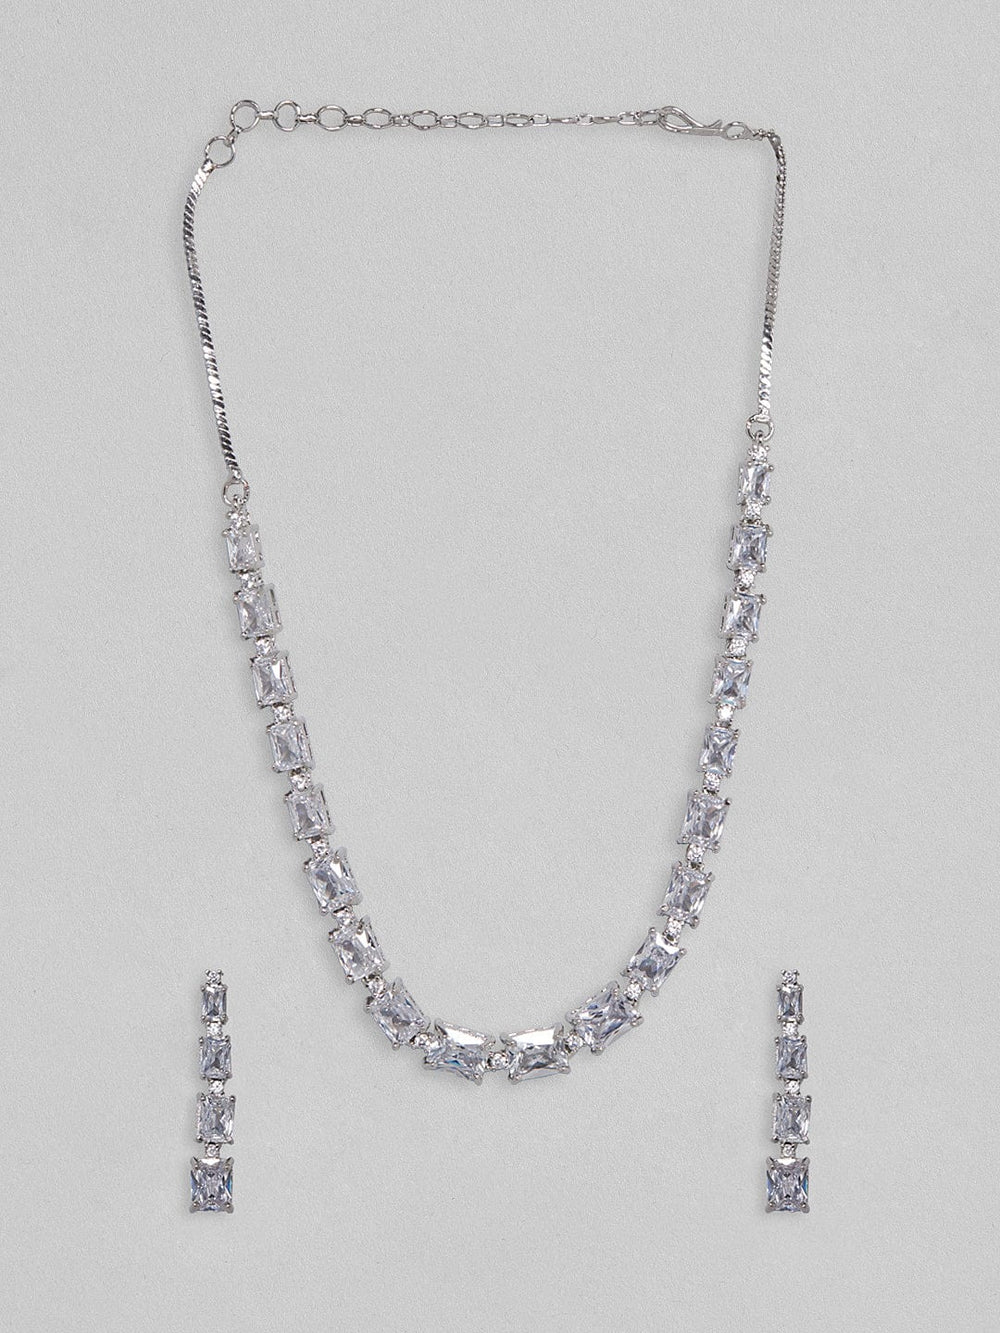 Rubans Silver Plated Necklace Set With White Stones. Necklace Set